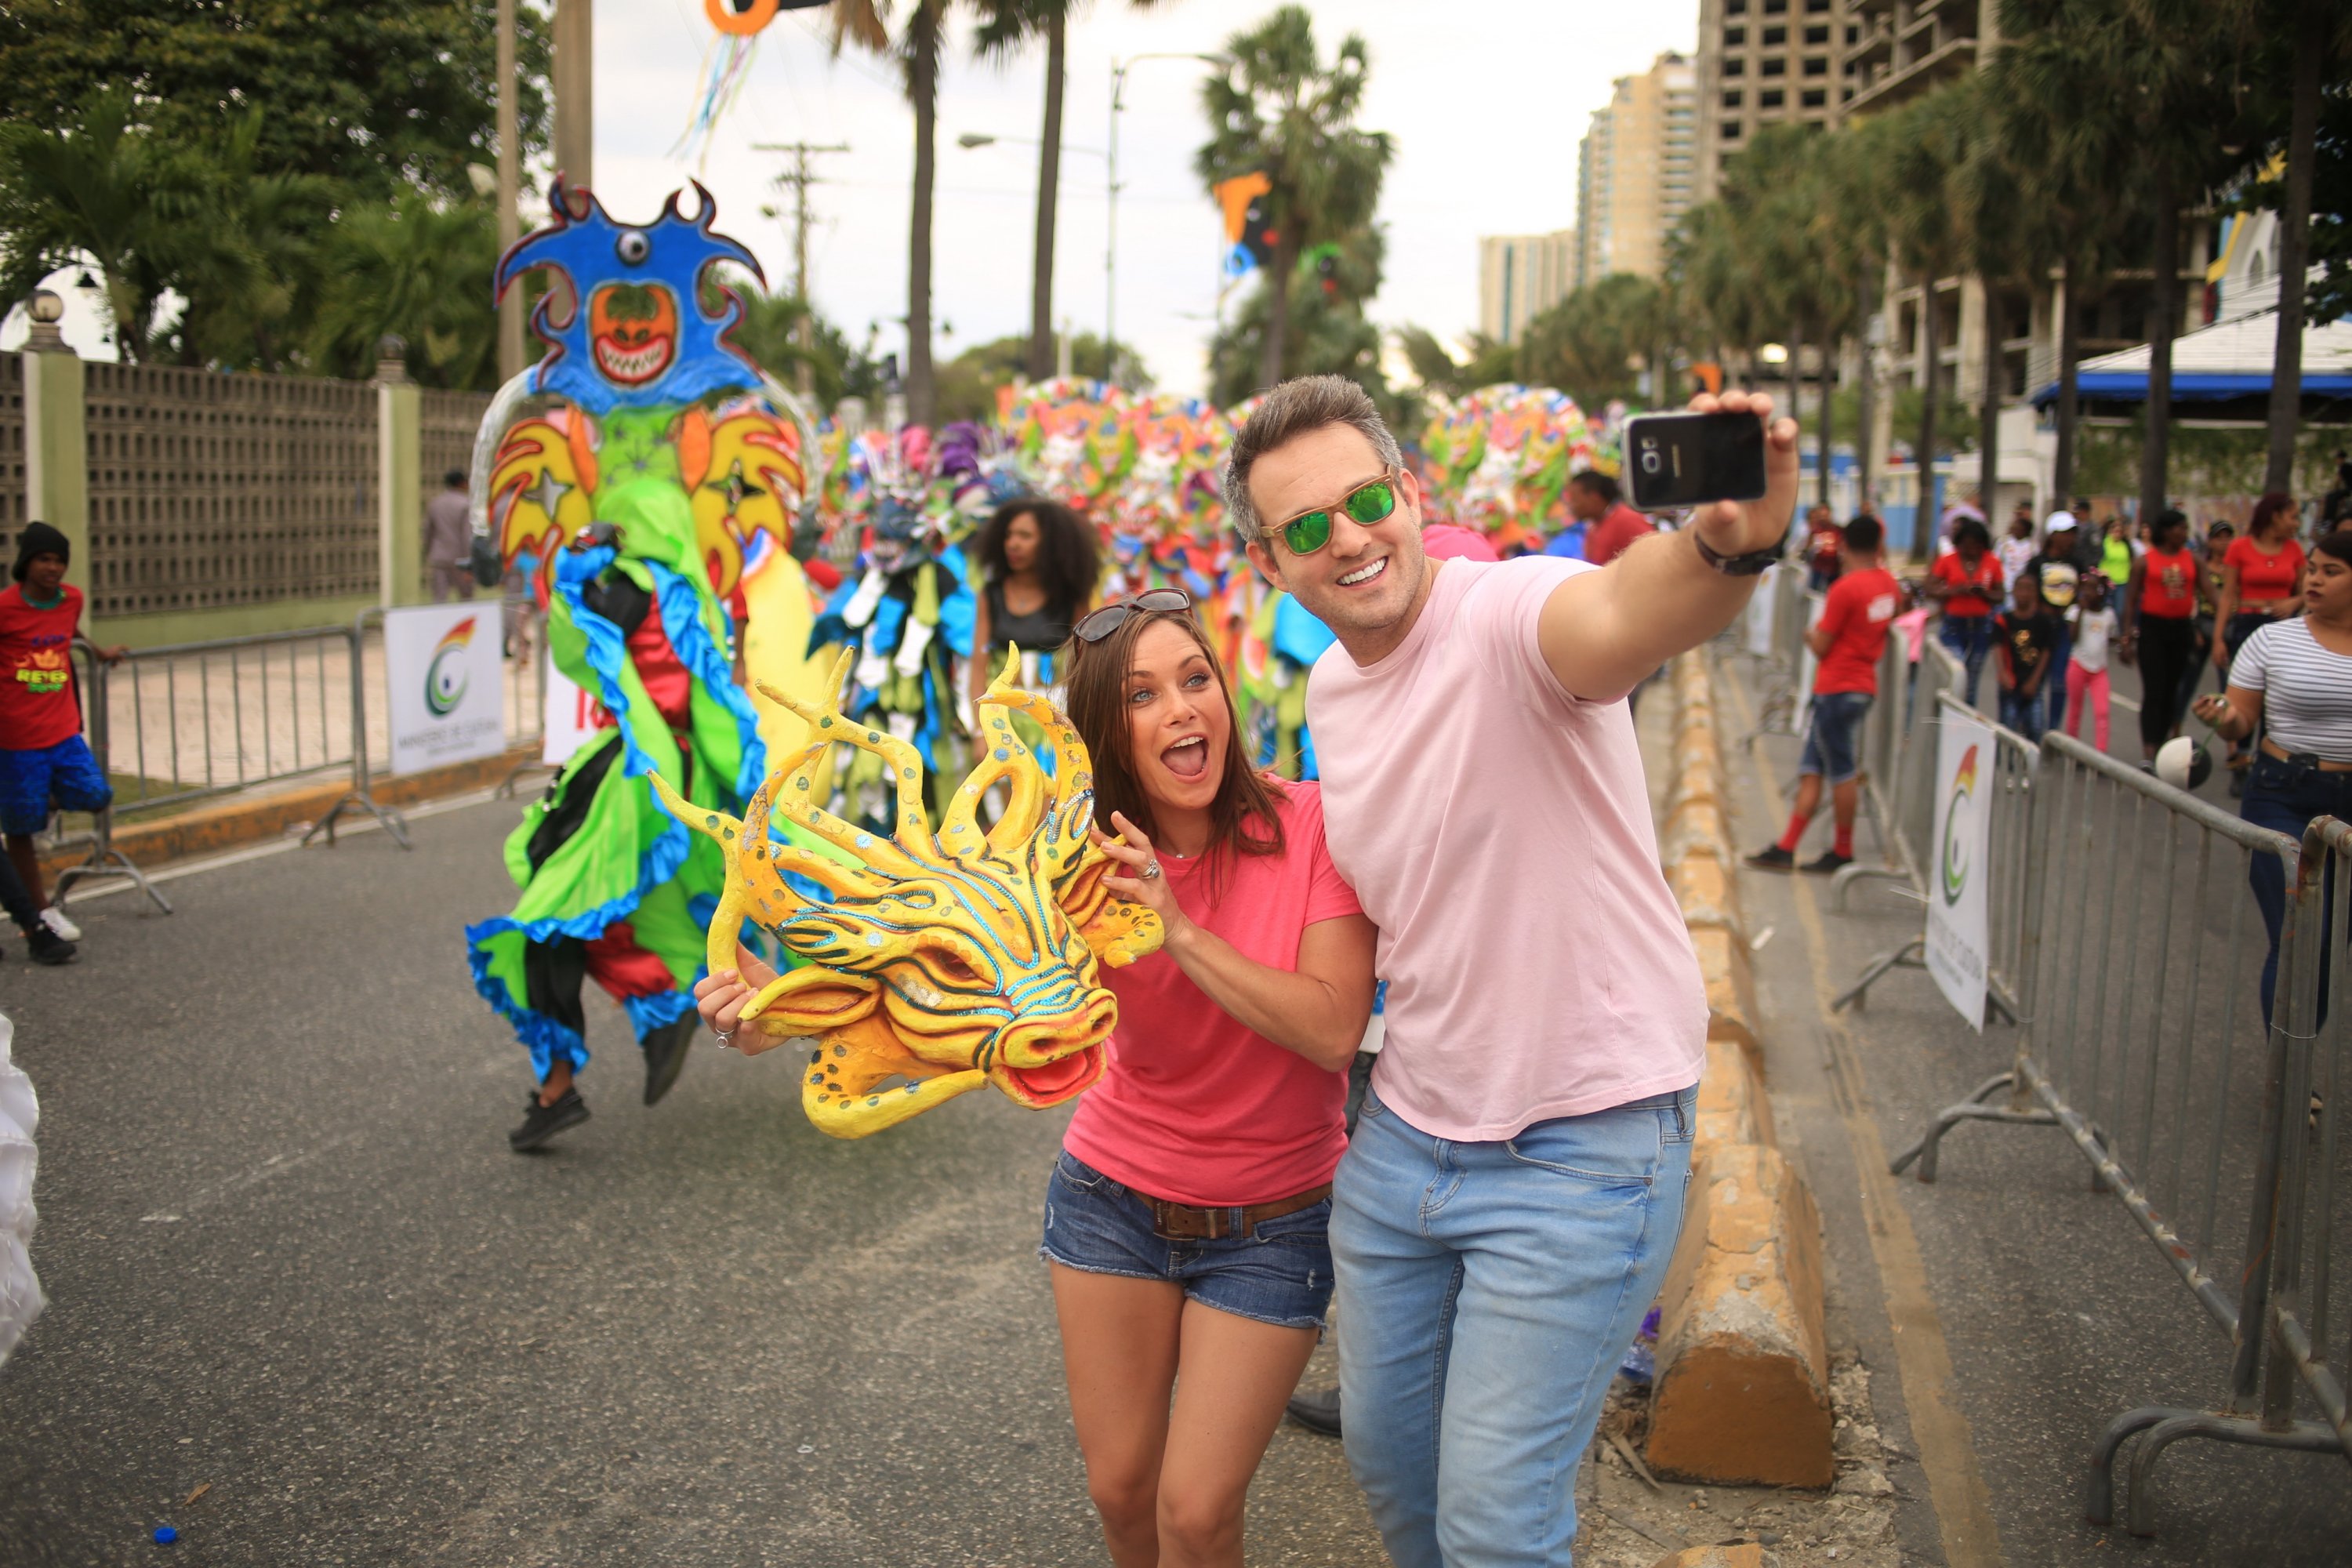 Tourists take a selfie with dragon head at the carnival in the Dominican Republic, Dec. 17, 2019. (DPA)